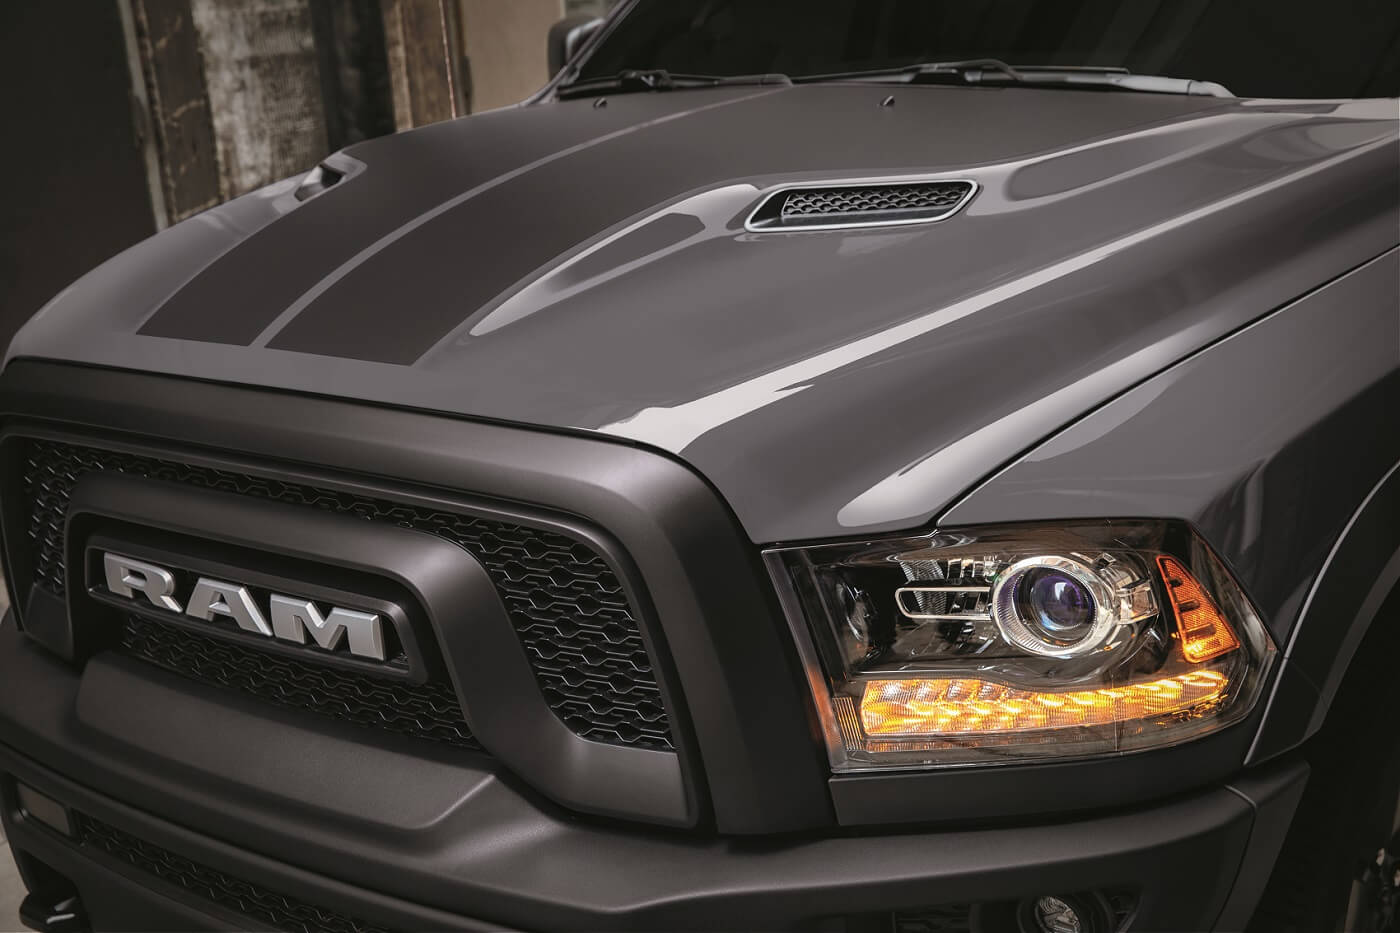 2020 Ram 1500 Engines & Towing